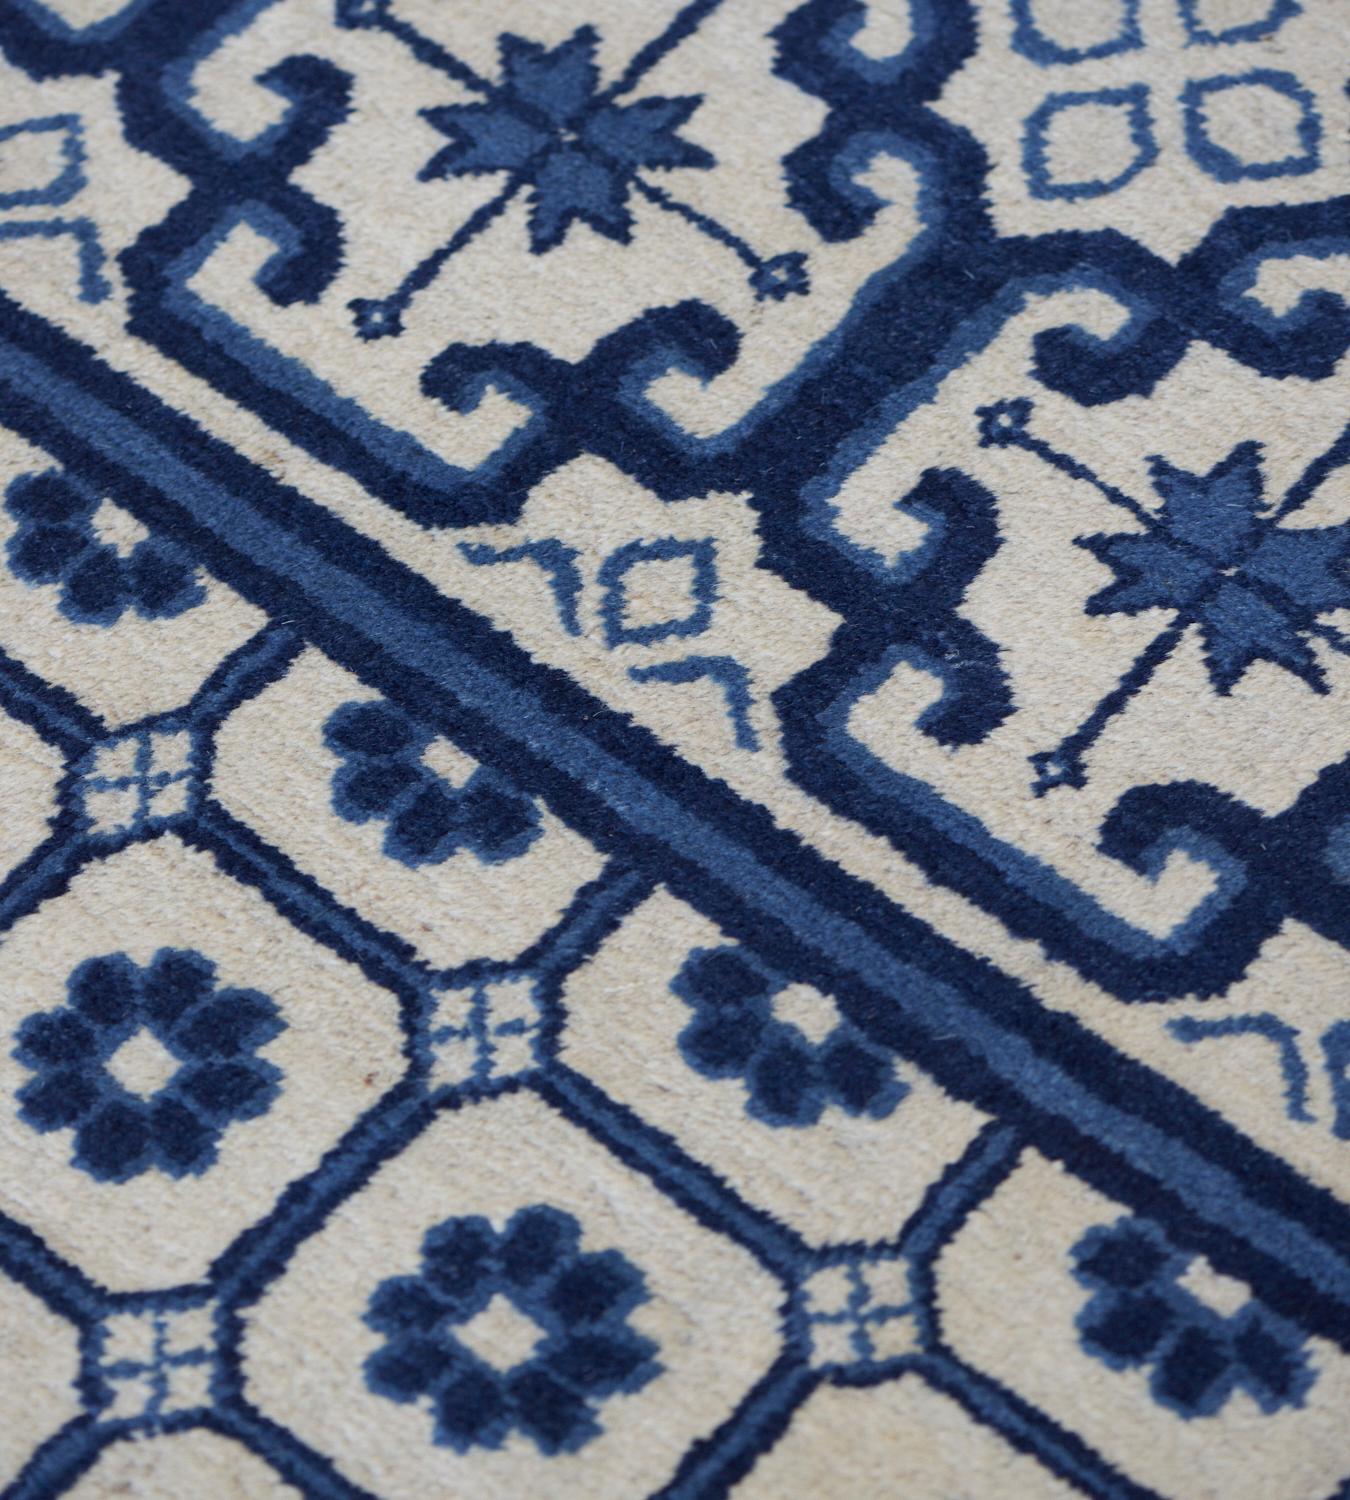 Antique Traditional Blue Wool Chinese Peking Rug In Excellent Condition For Sale In West Hollywood, CA